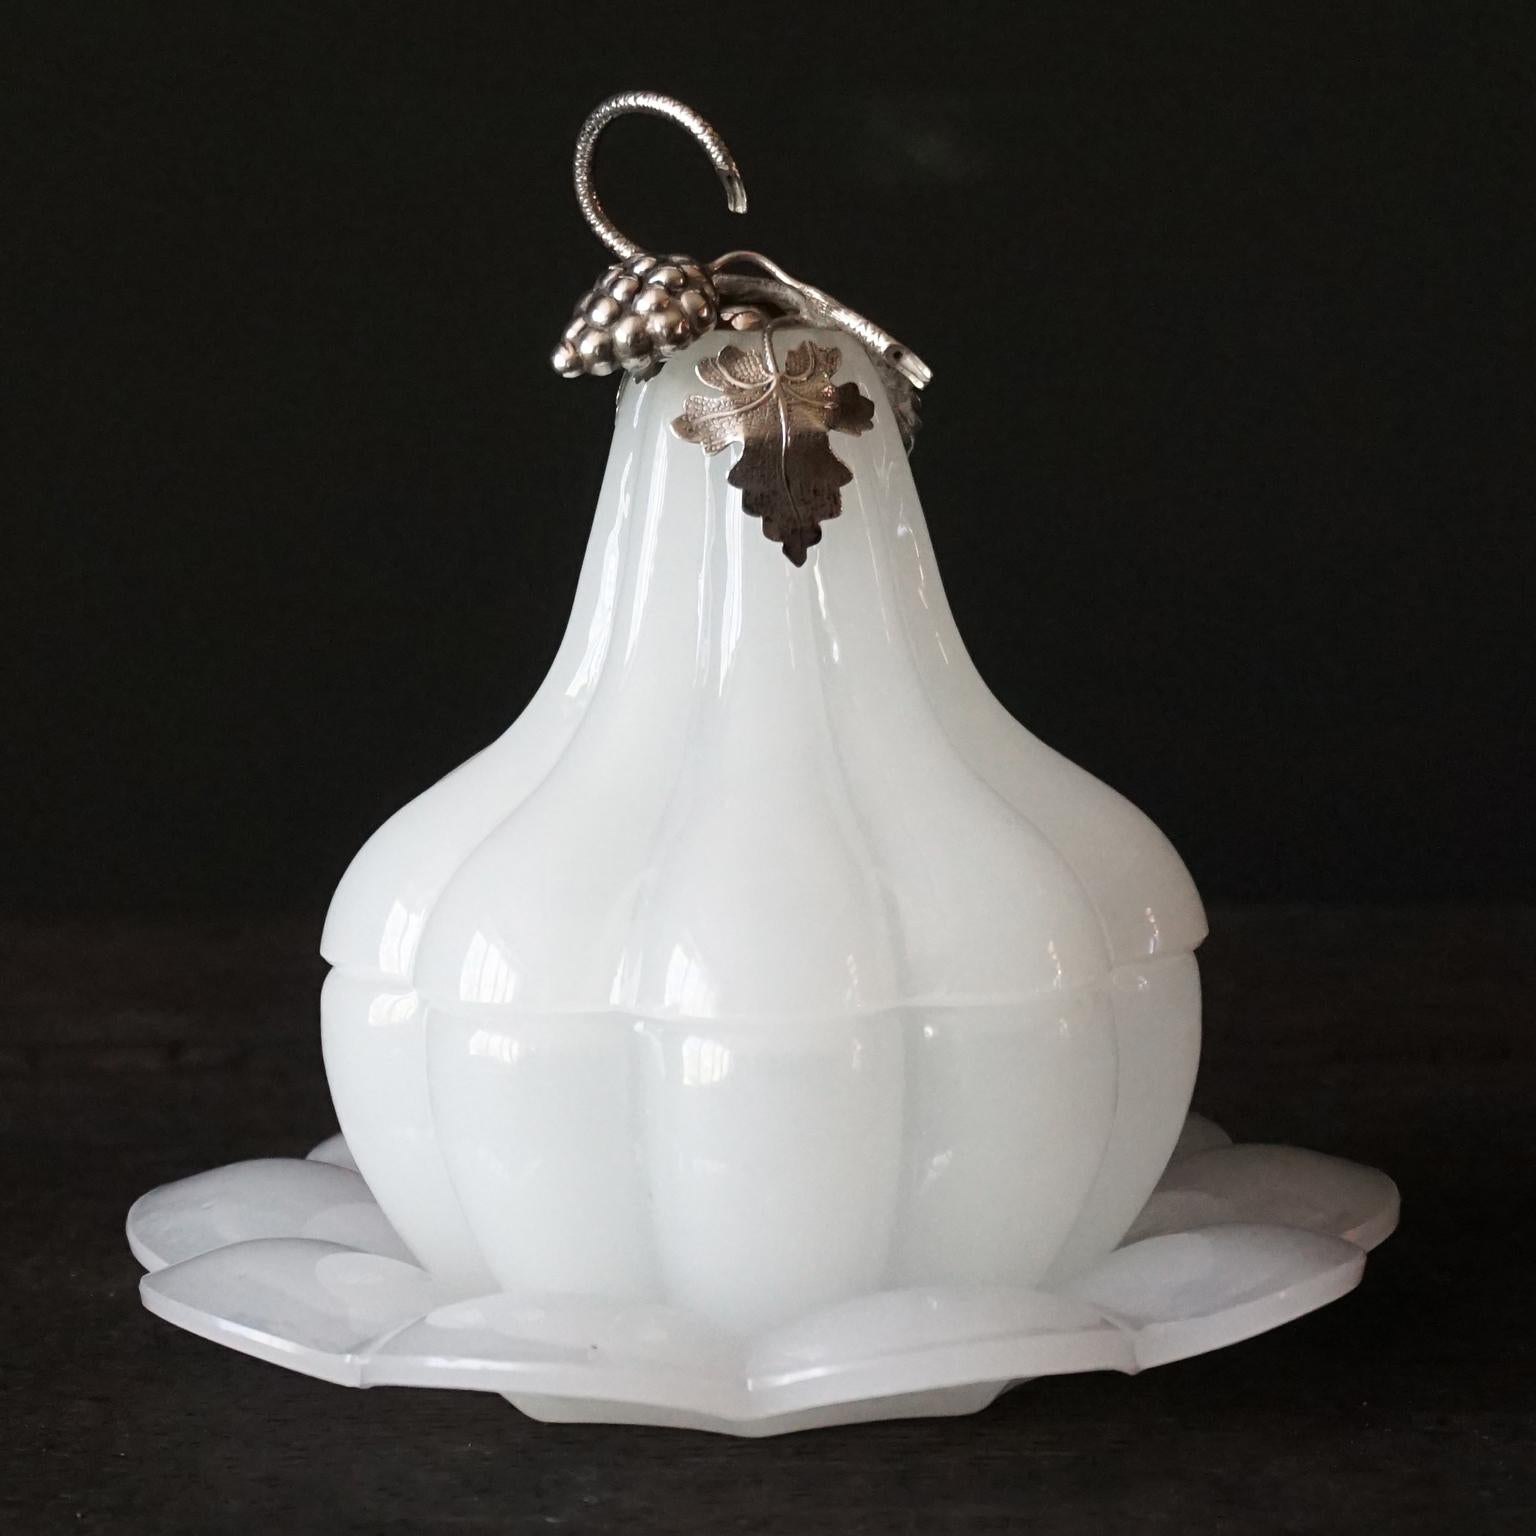 Mid-Century Modern 1950s White Opaline Glass Pear or Gourd Lidded Jar with Silver Grapes and Leaves For Sale